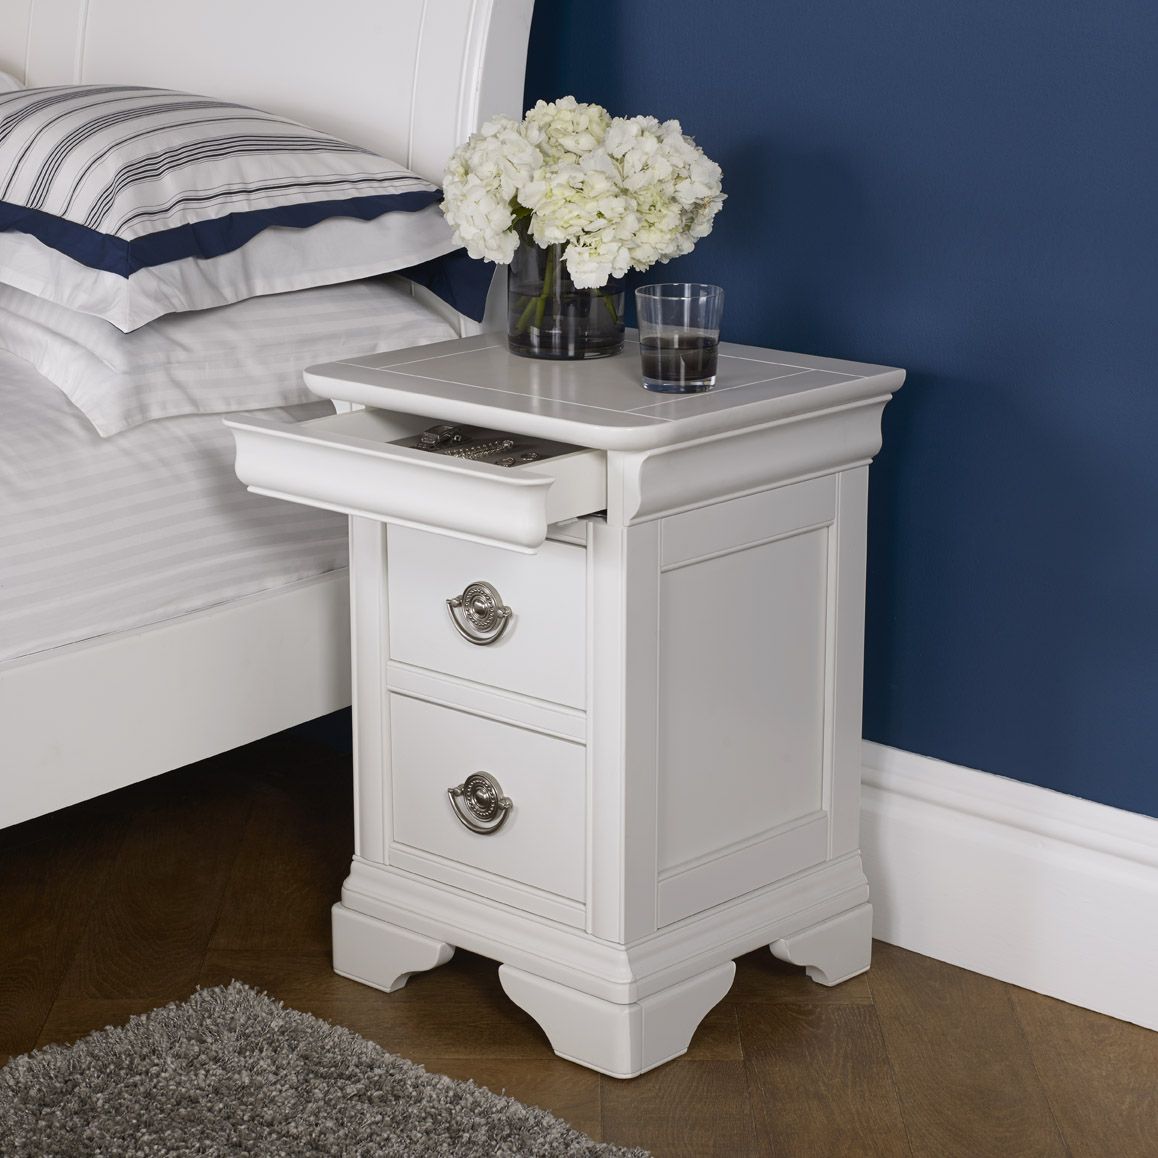 Bedside Tables & Cabinets